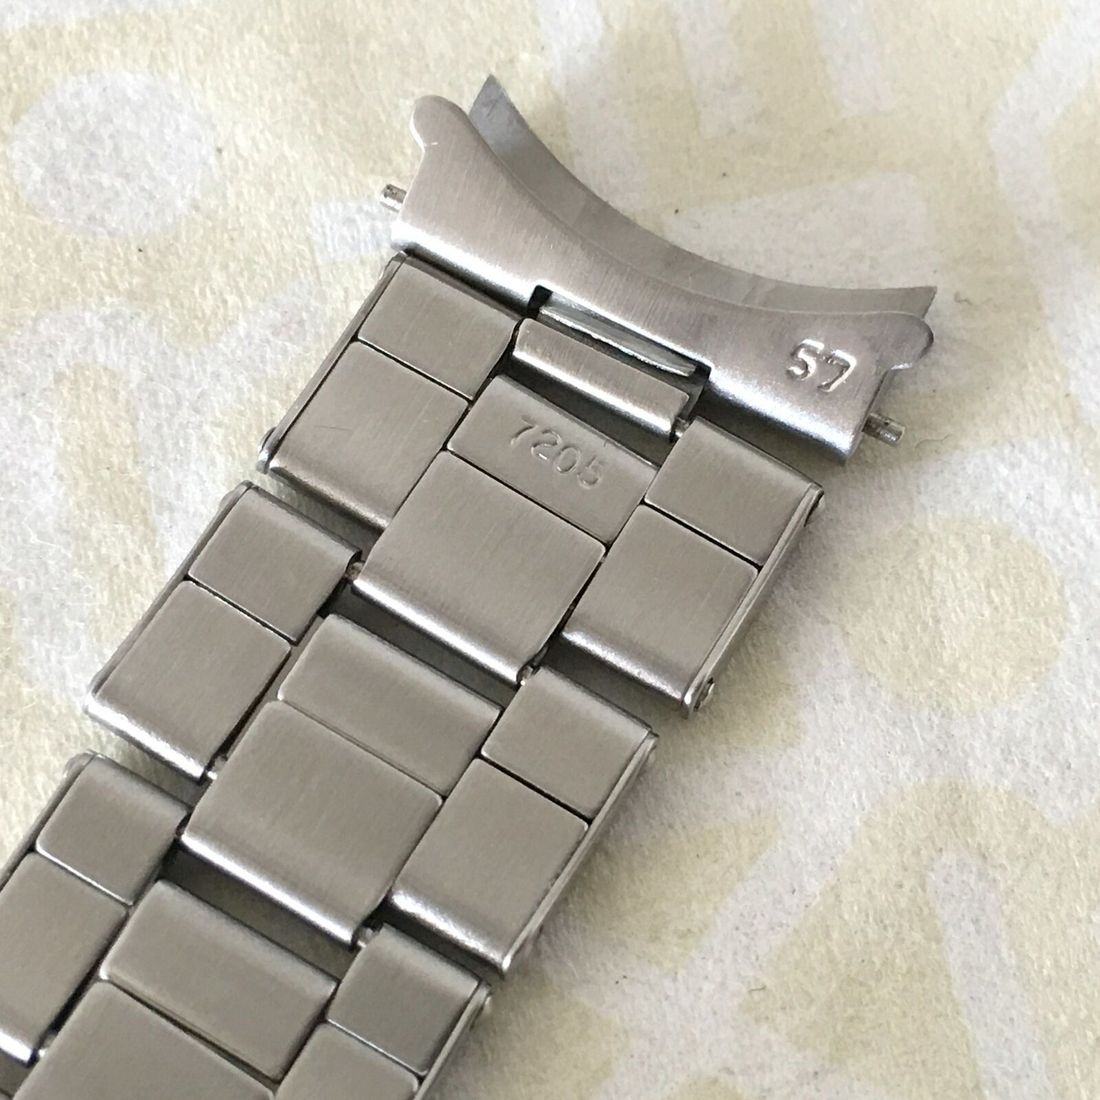 Authentic Rolex 7205 Bracelet Thrift Store Find? Opinions? | Omega Forums